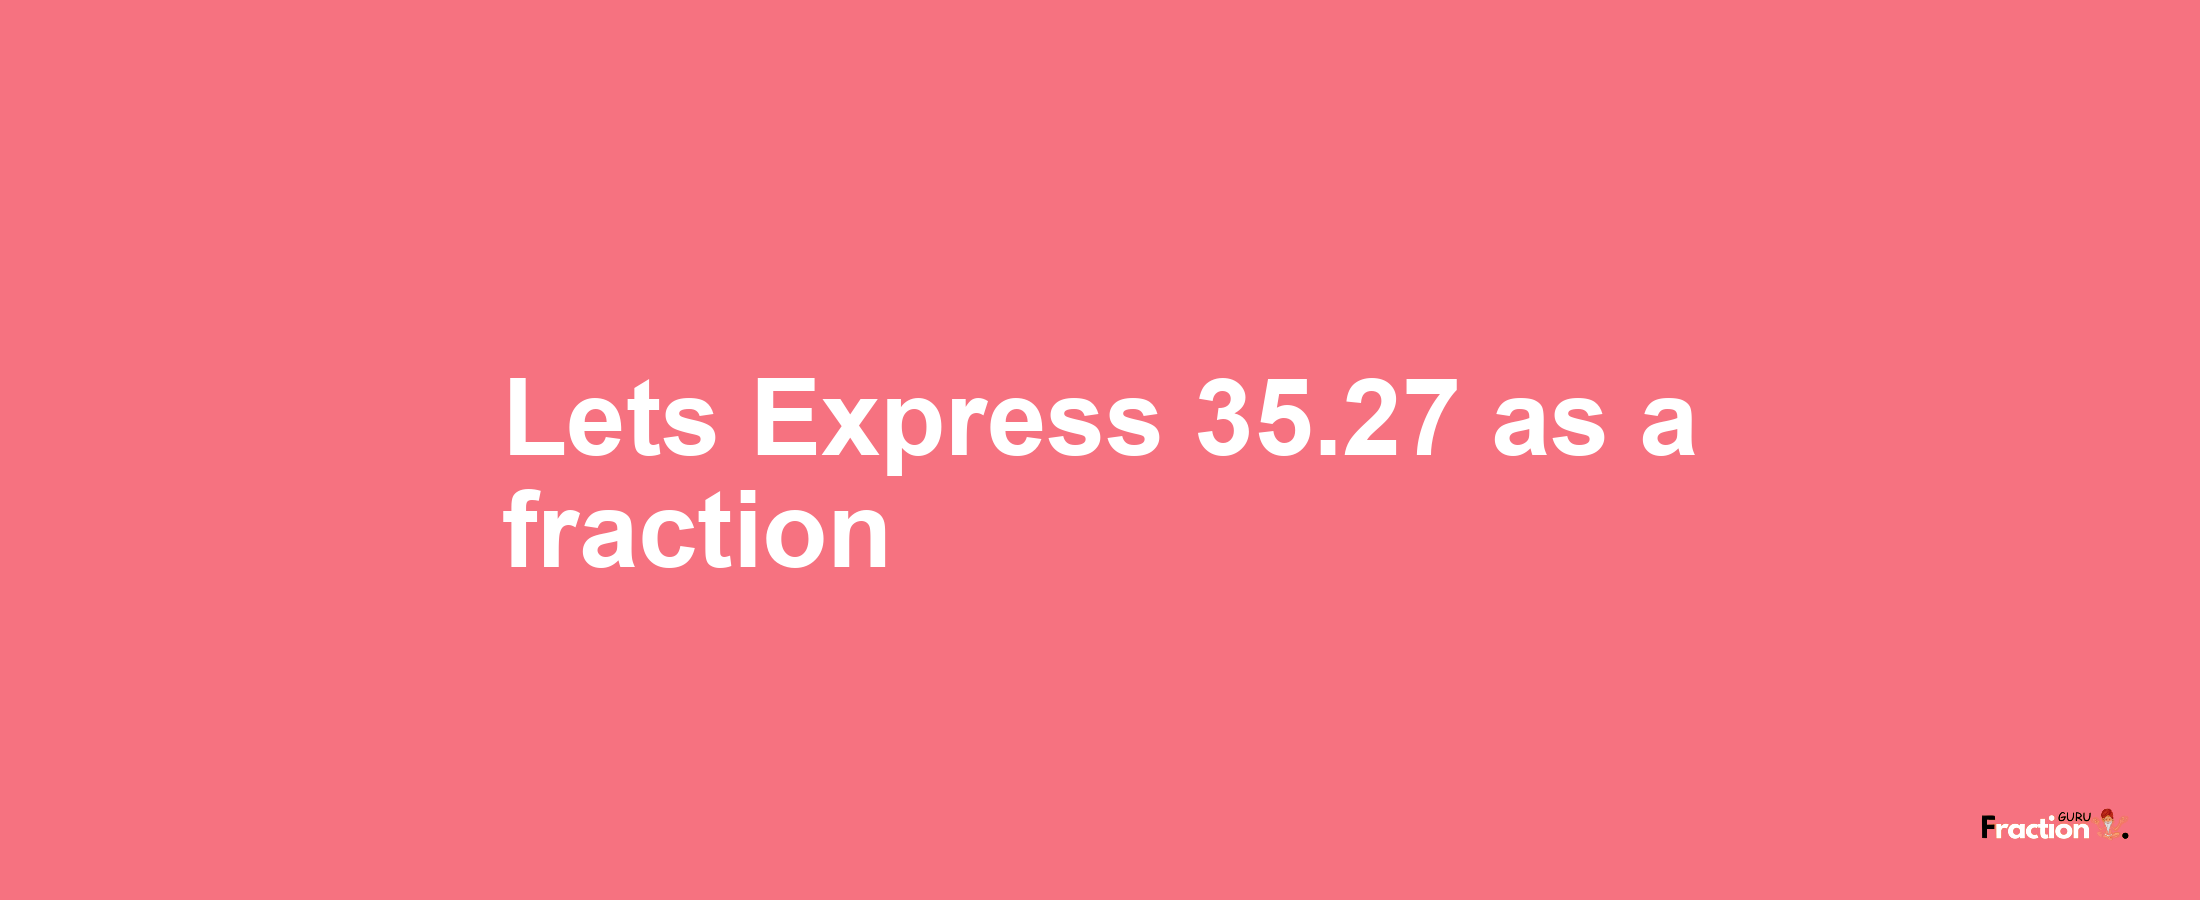 Lets Express 35.27 as afraction